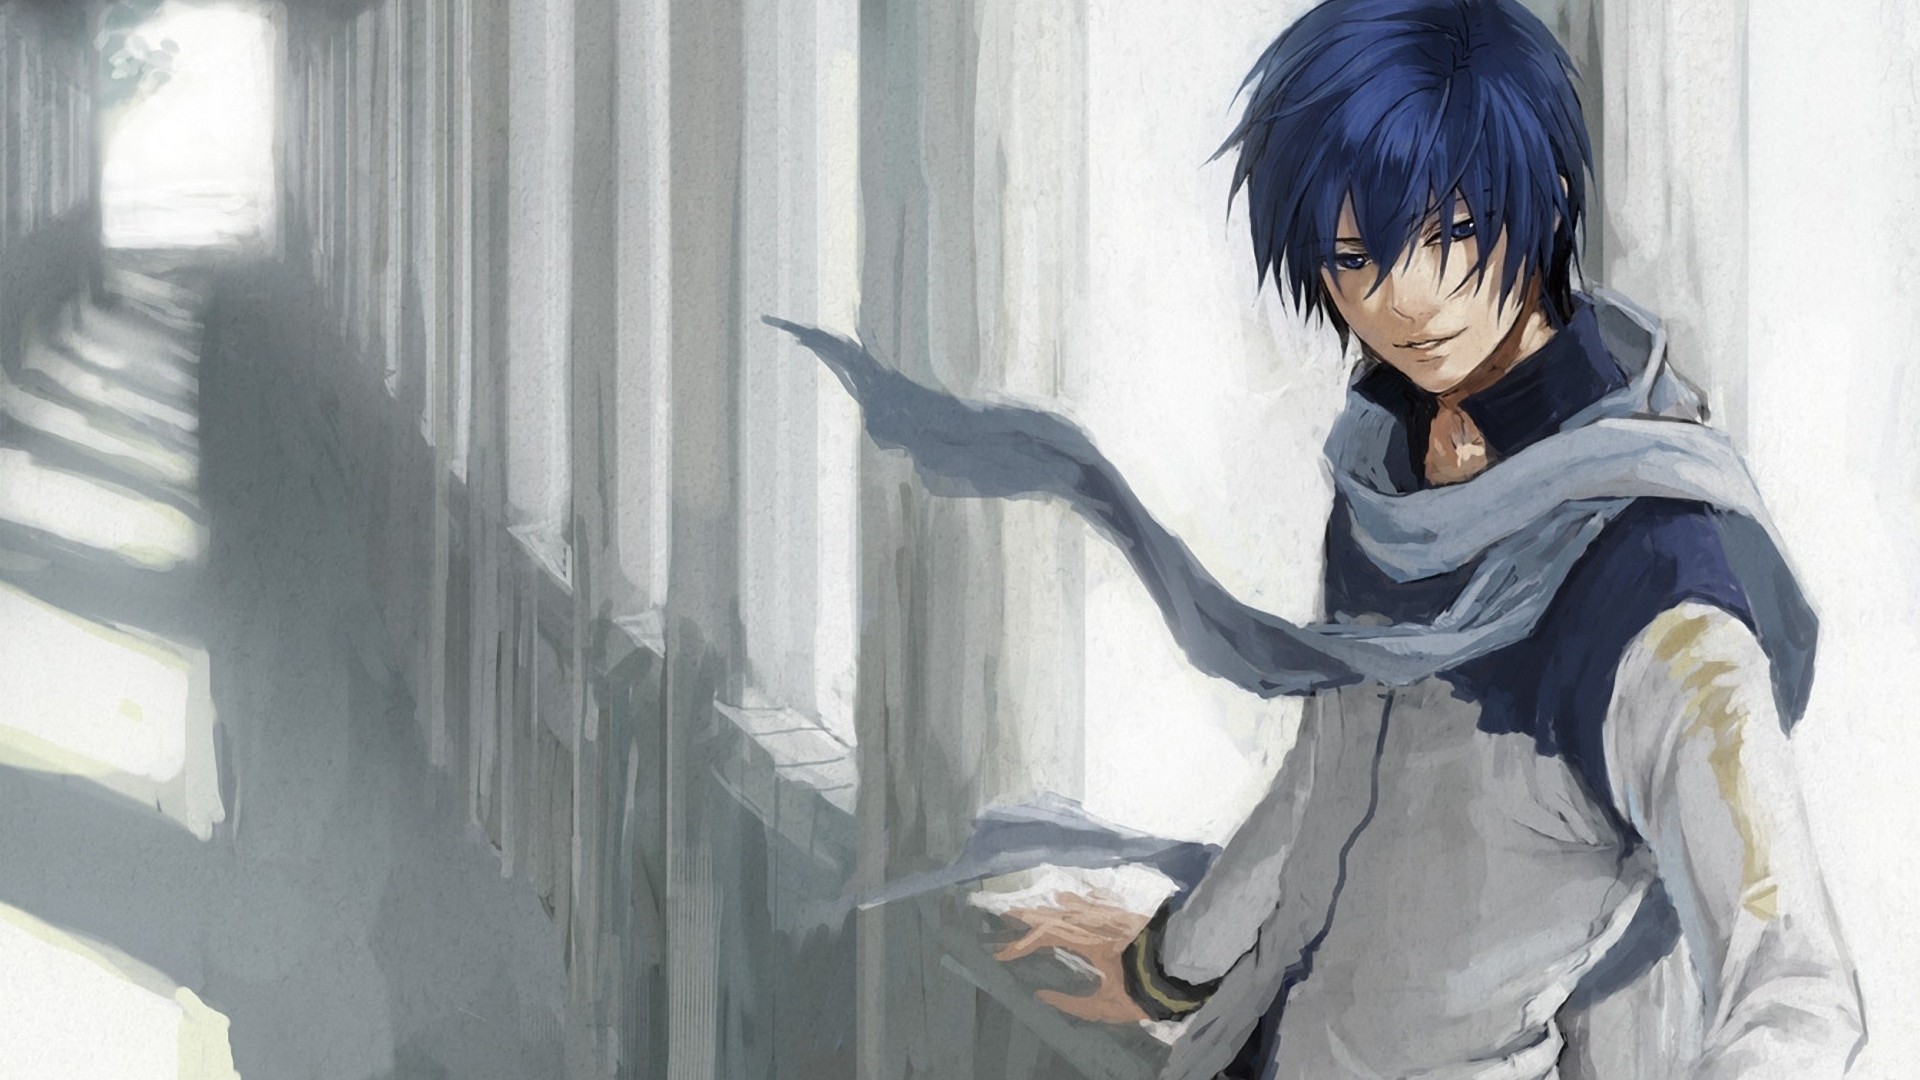 1920x1080 Kaito-Vocaloid-Images